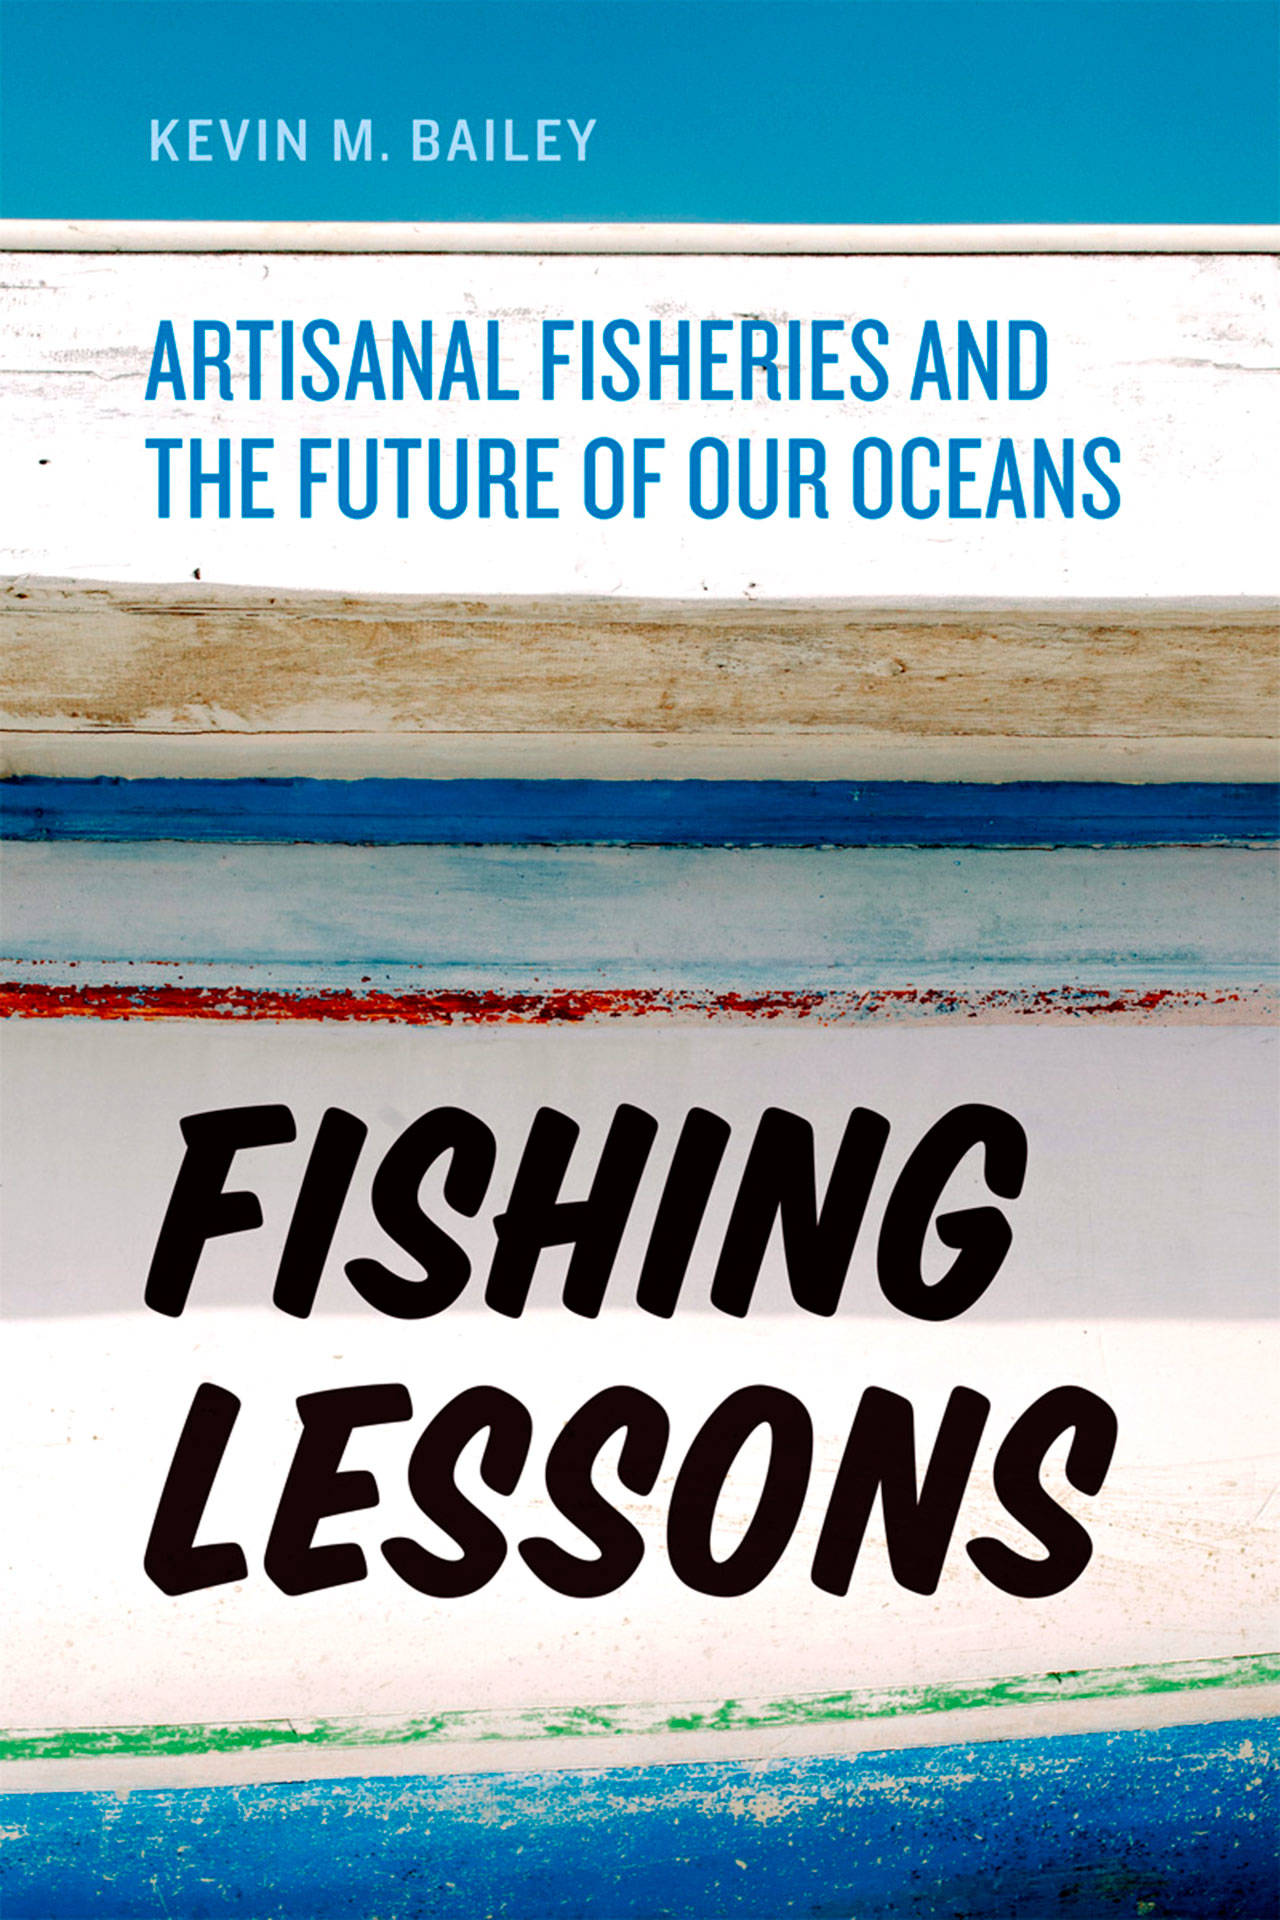 Scientist to talk about ‘artisanal fisheries’ in lecture